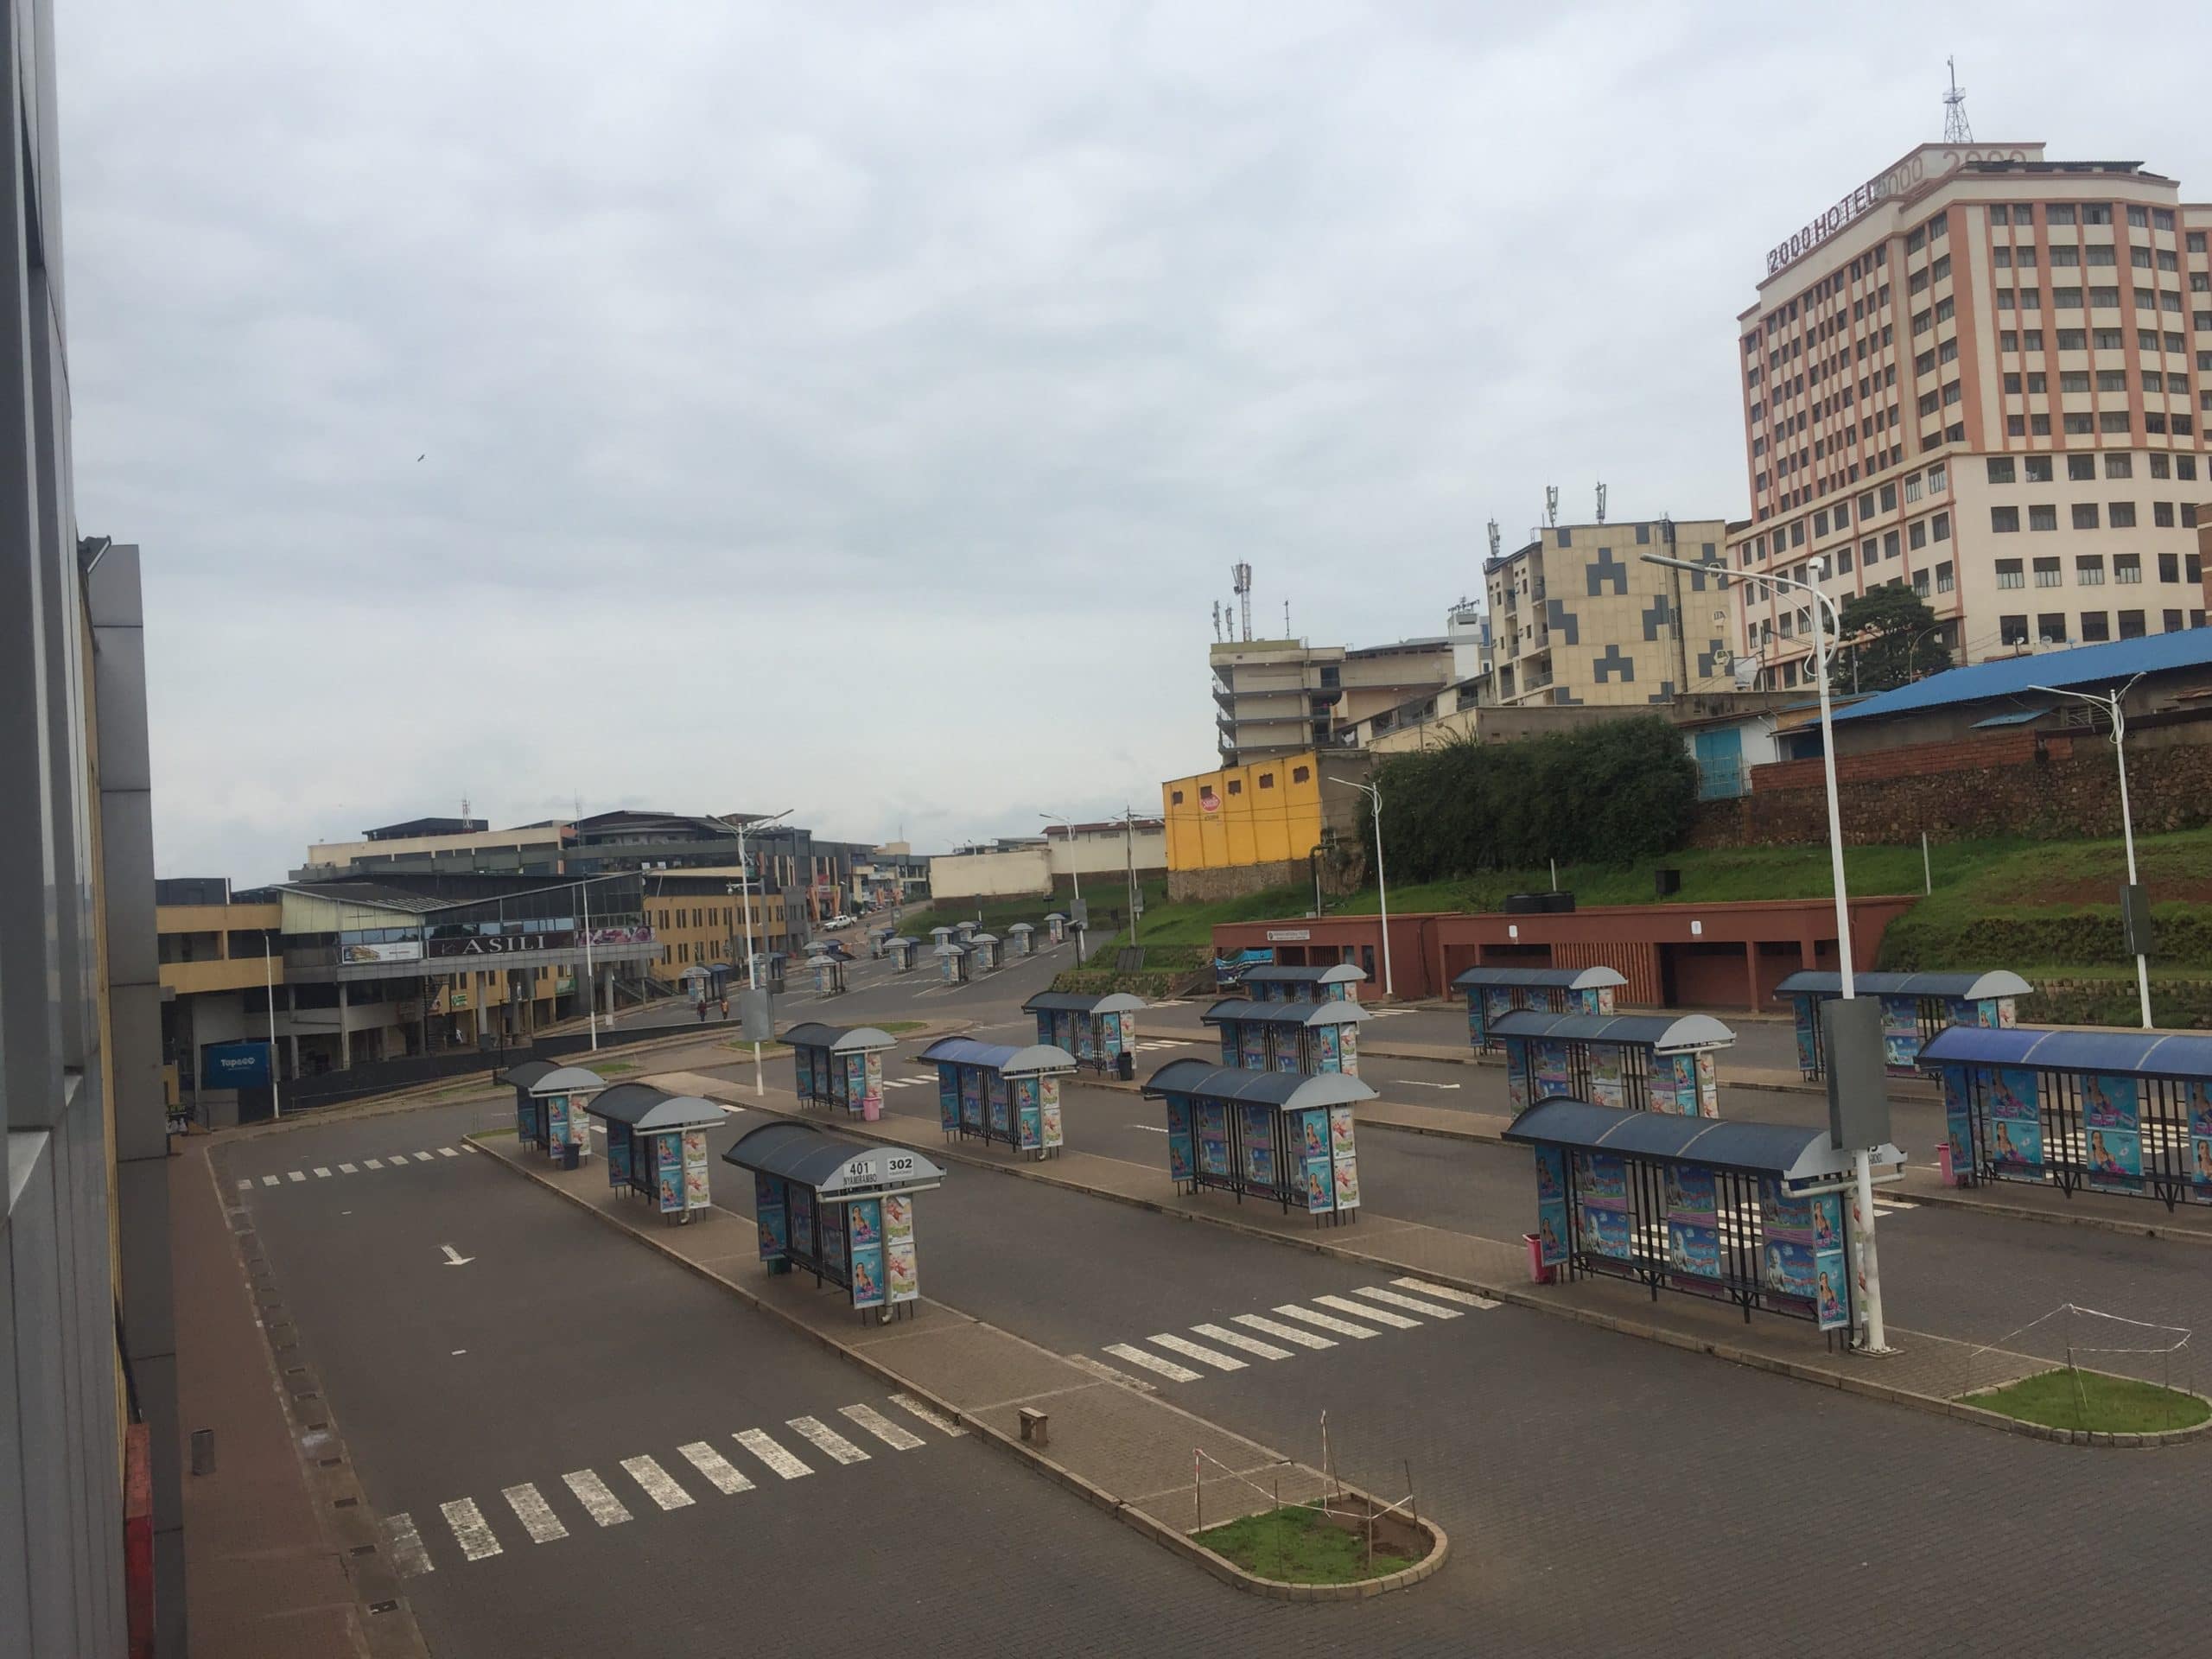 Public transport was banned in Rwanda as a measure to curb the spread of COVID-19. This is Kigali downtown bus terminal